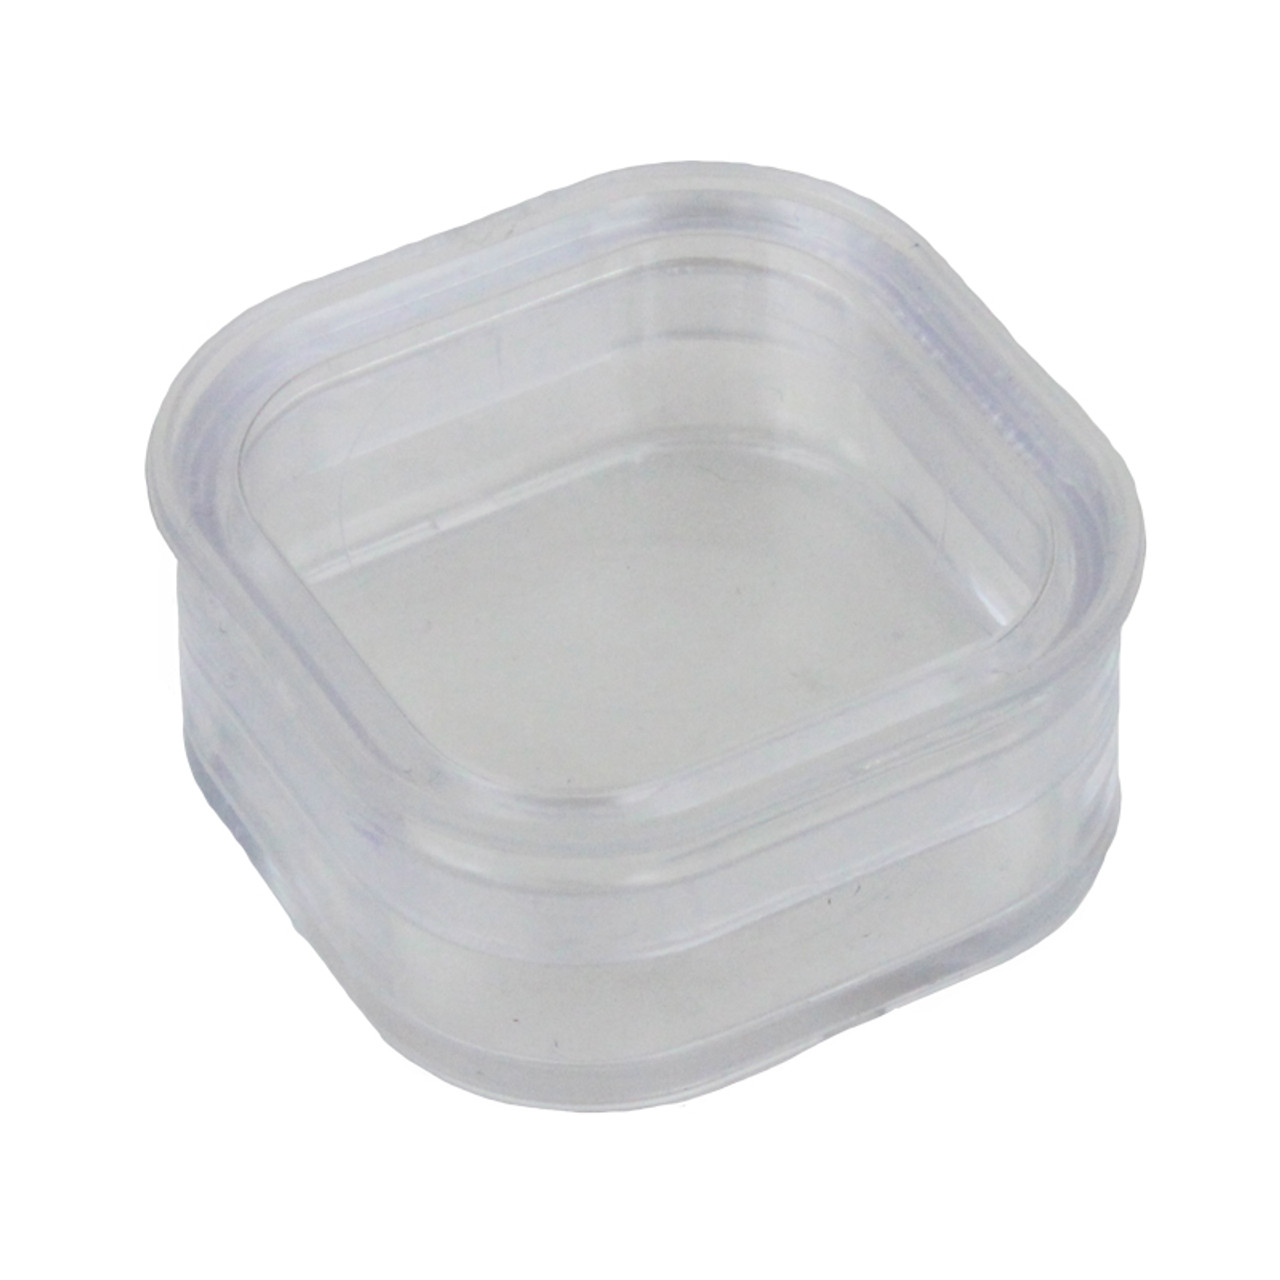 Elastic Membrane Boxes with Hinged Lids 50 x 50mm, Small Plastic